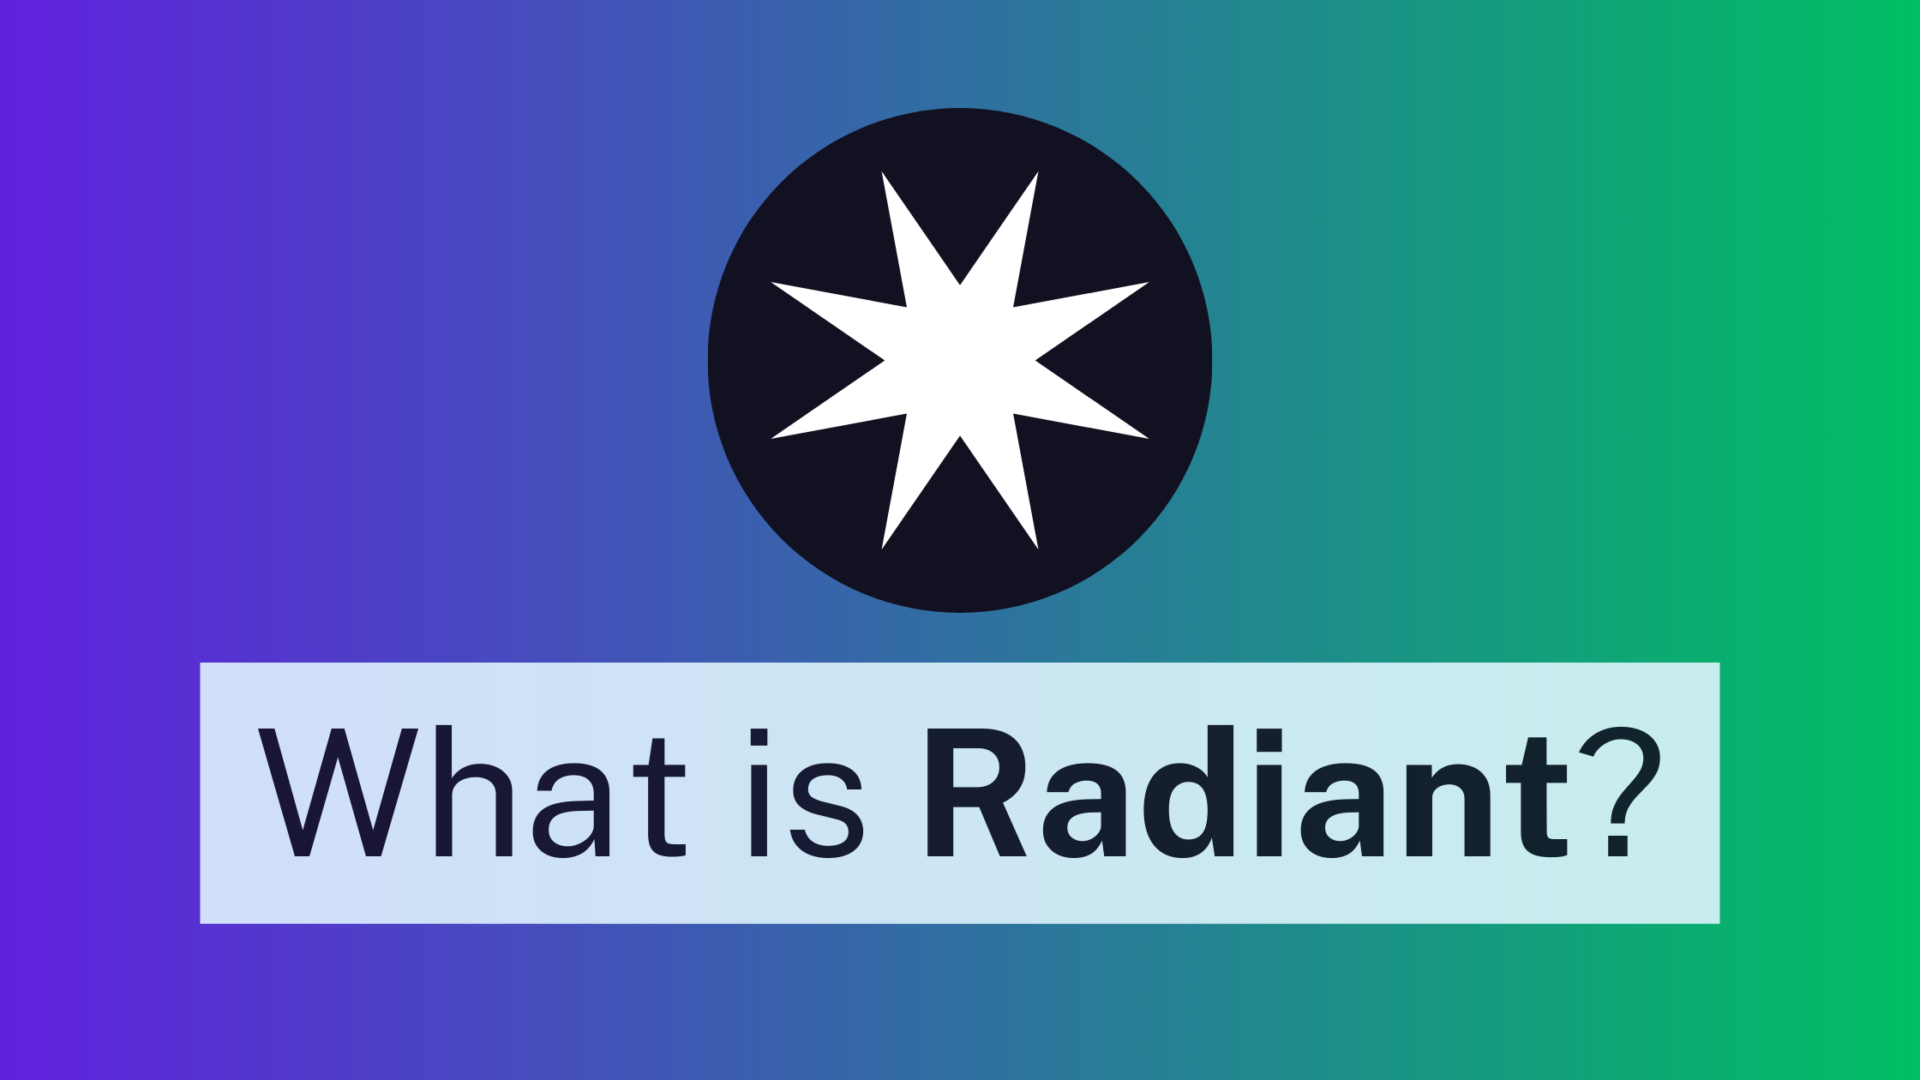 What is Radiant?